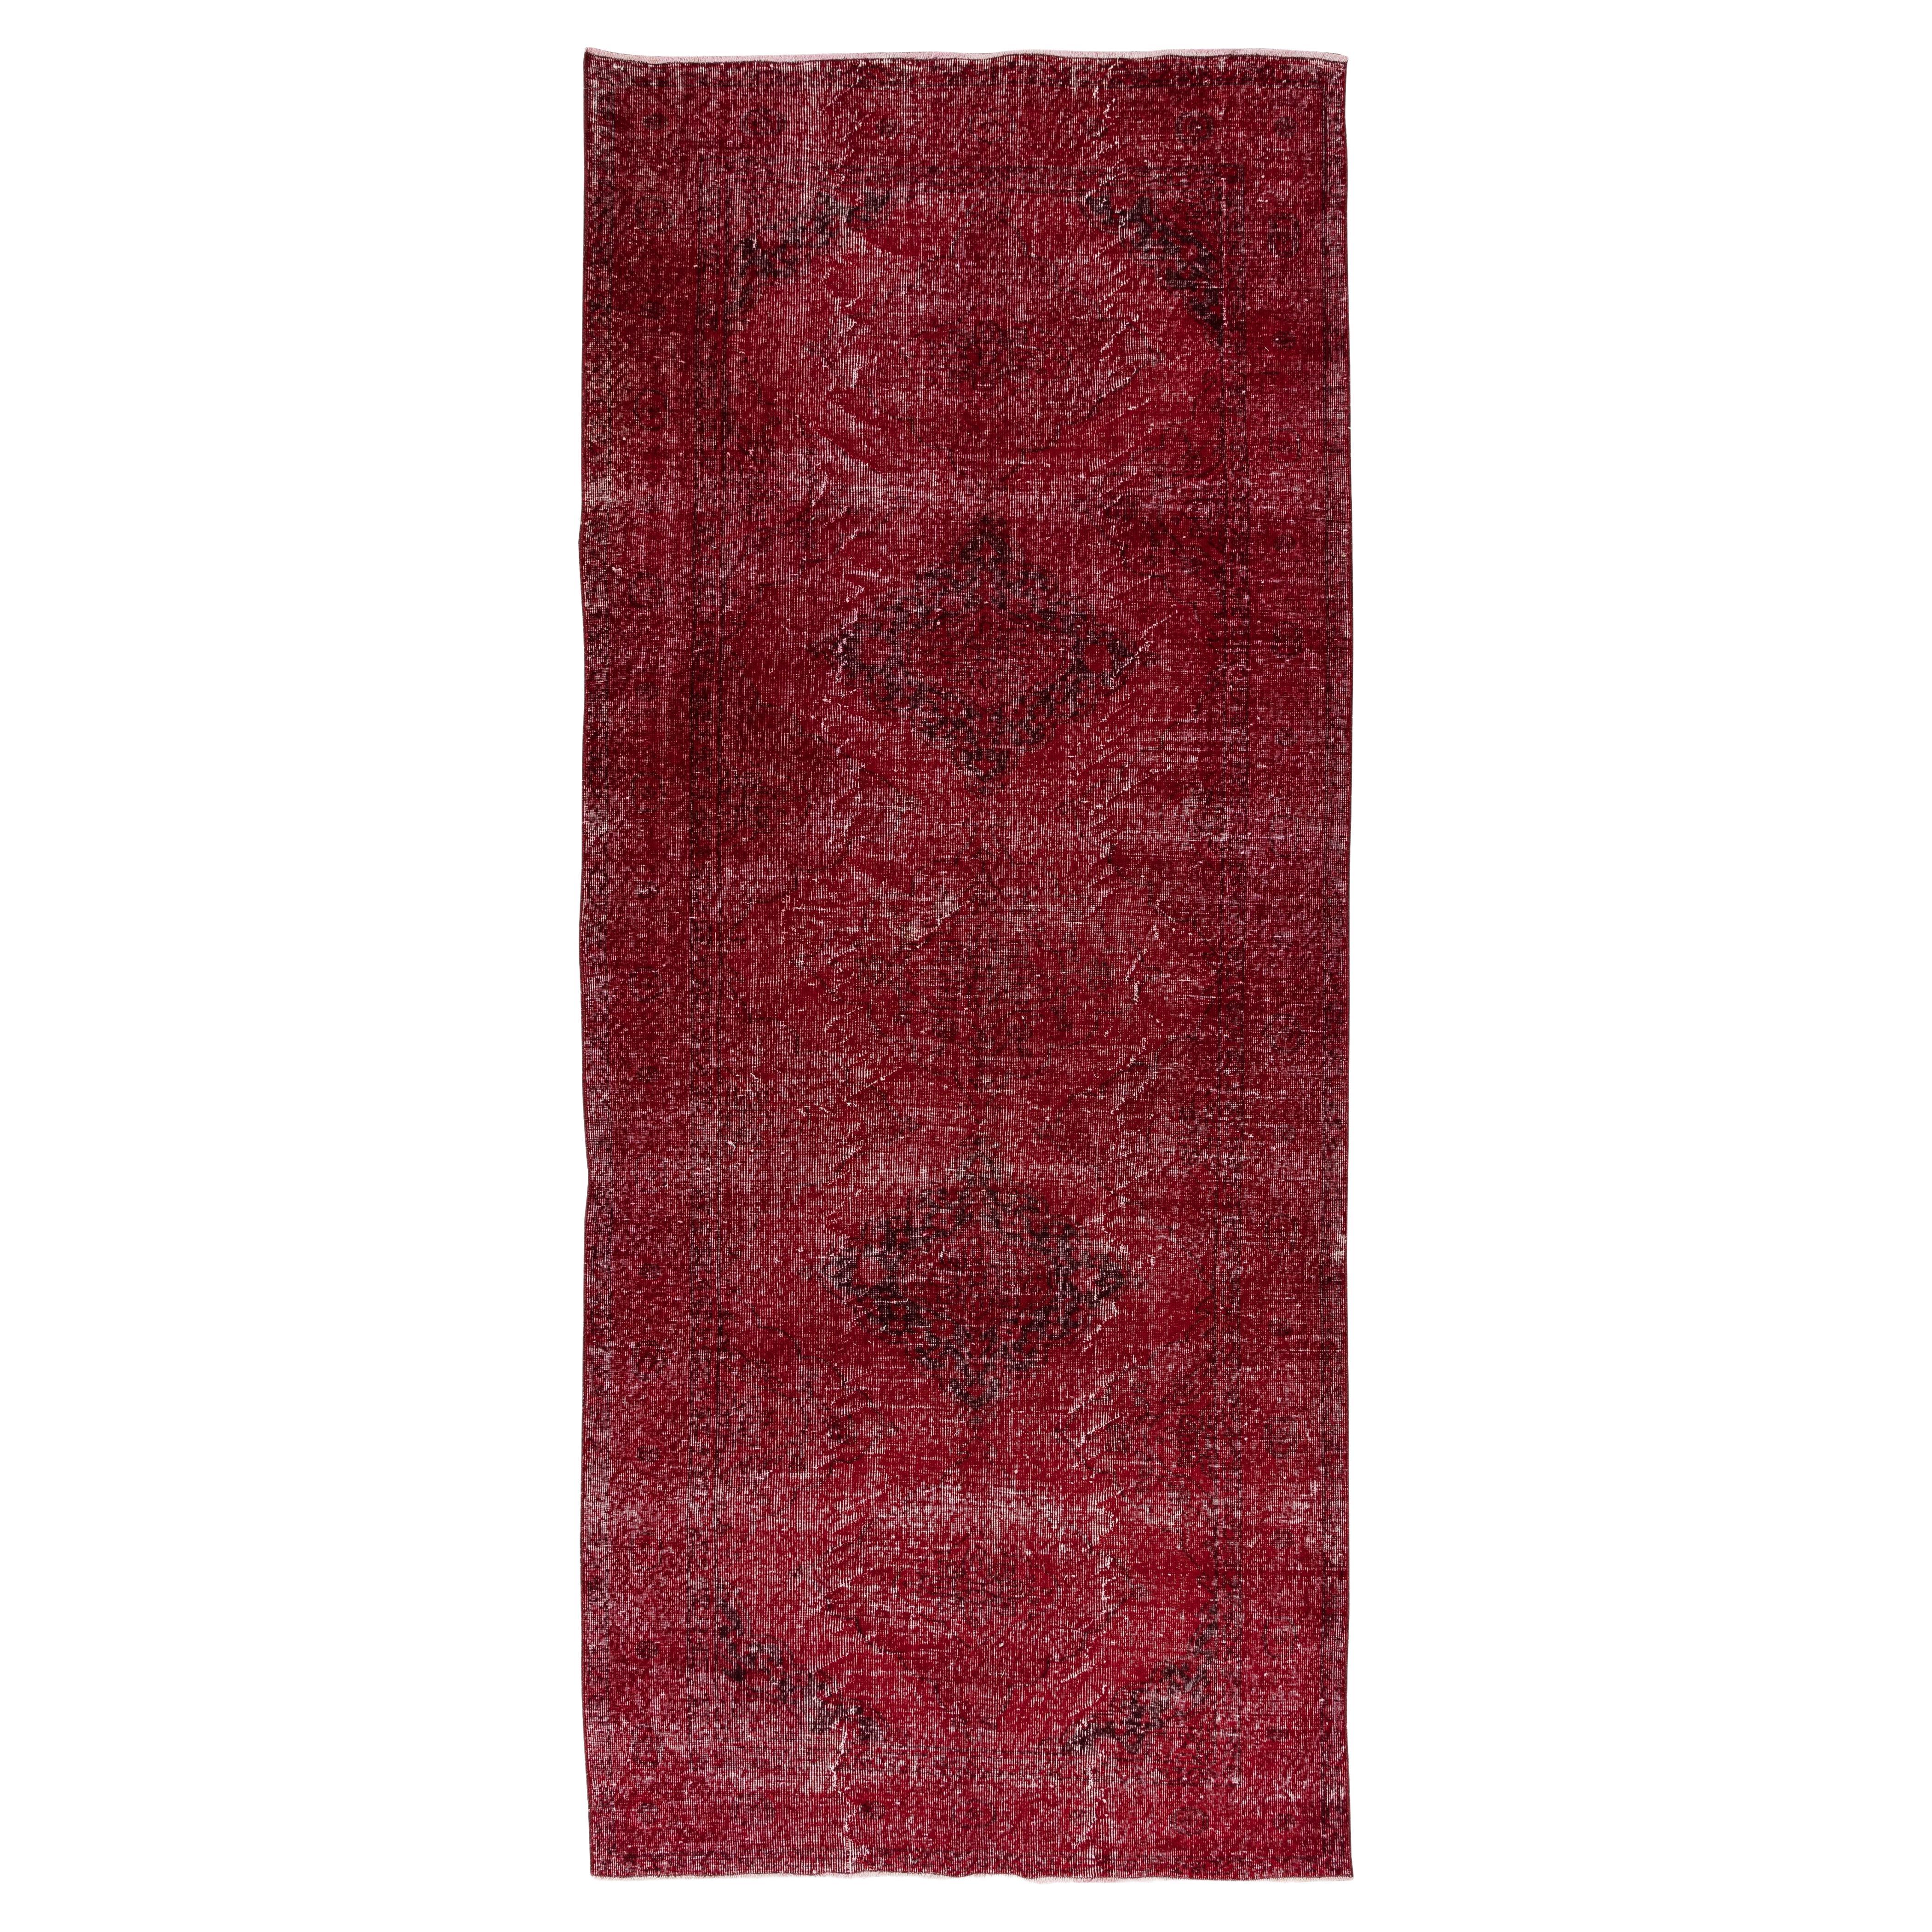 5x12 Ft Contemporary Handmade Konya Sille Runner Rug in Red for Hallway Decor For Sale